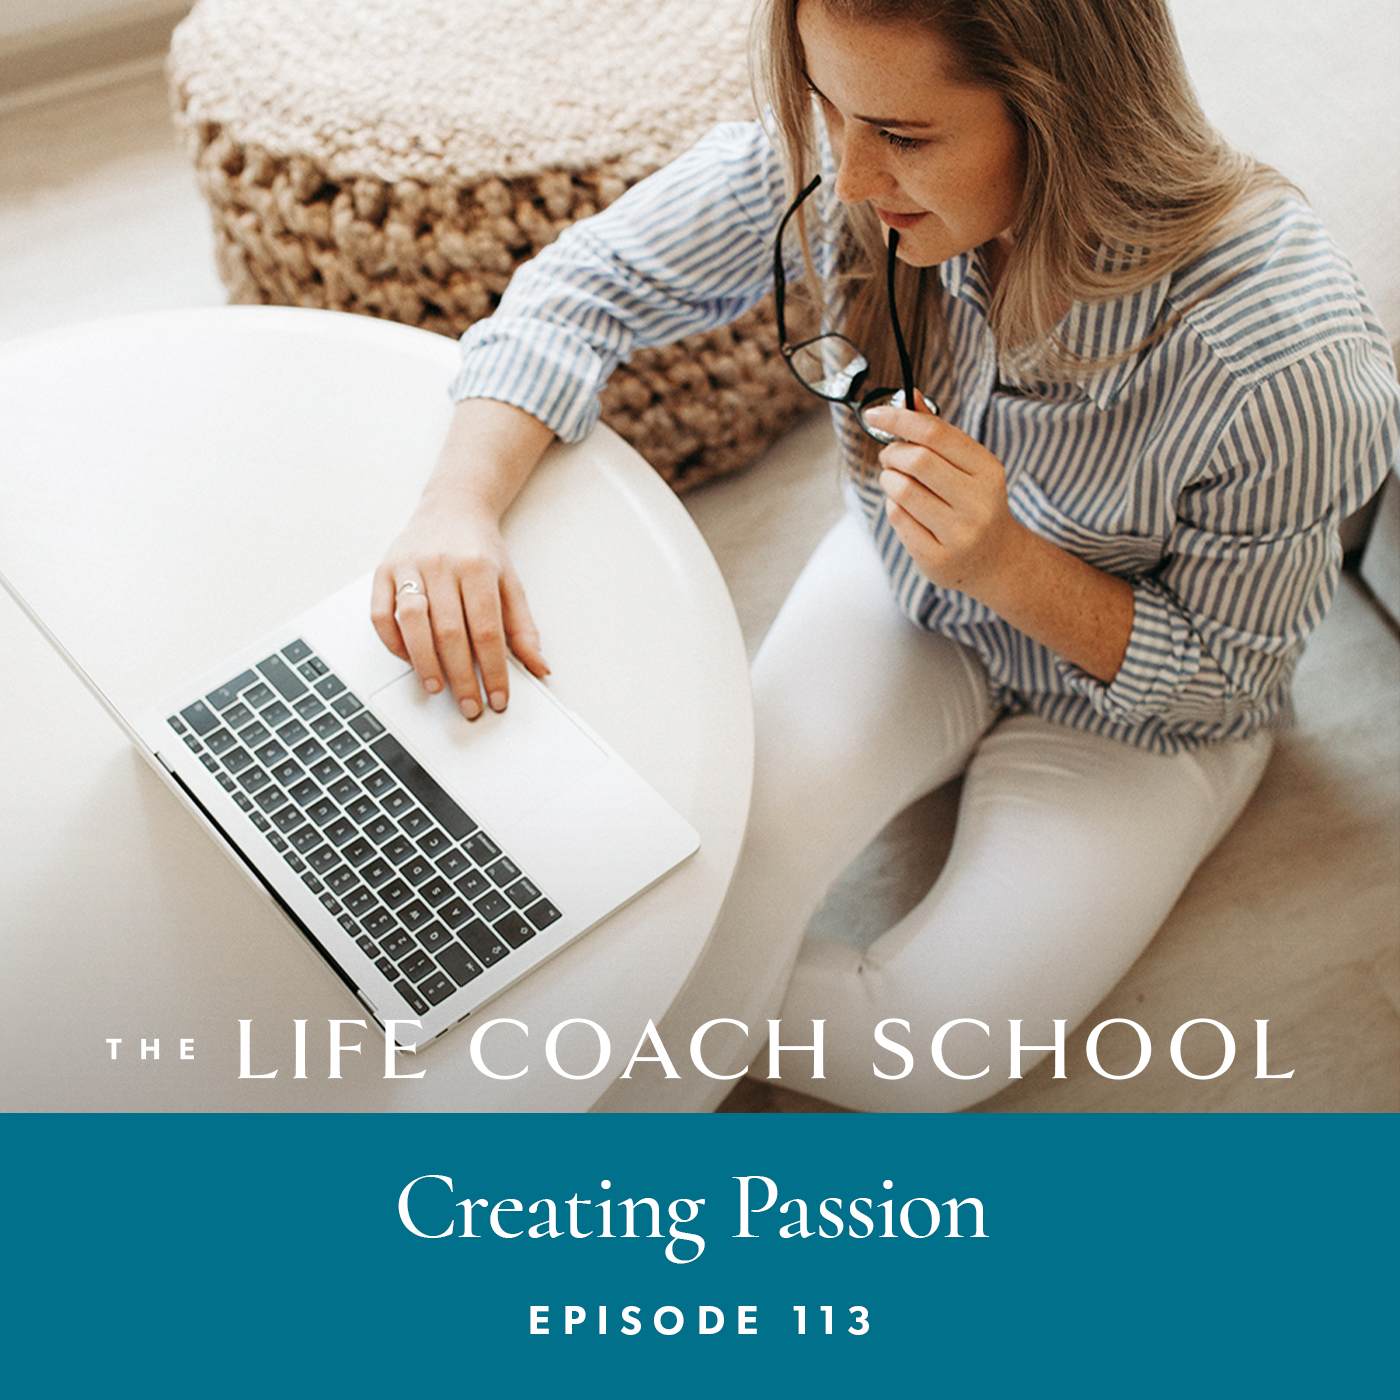 The Life Coach School Podcast with Brooke Castillo | Episode 113 | Creating Passion